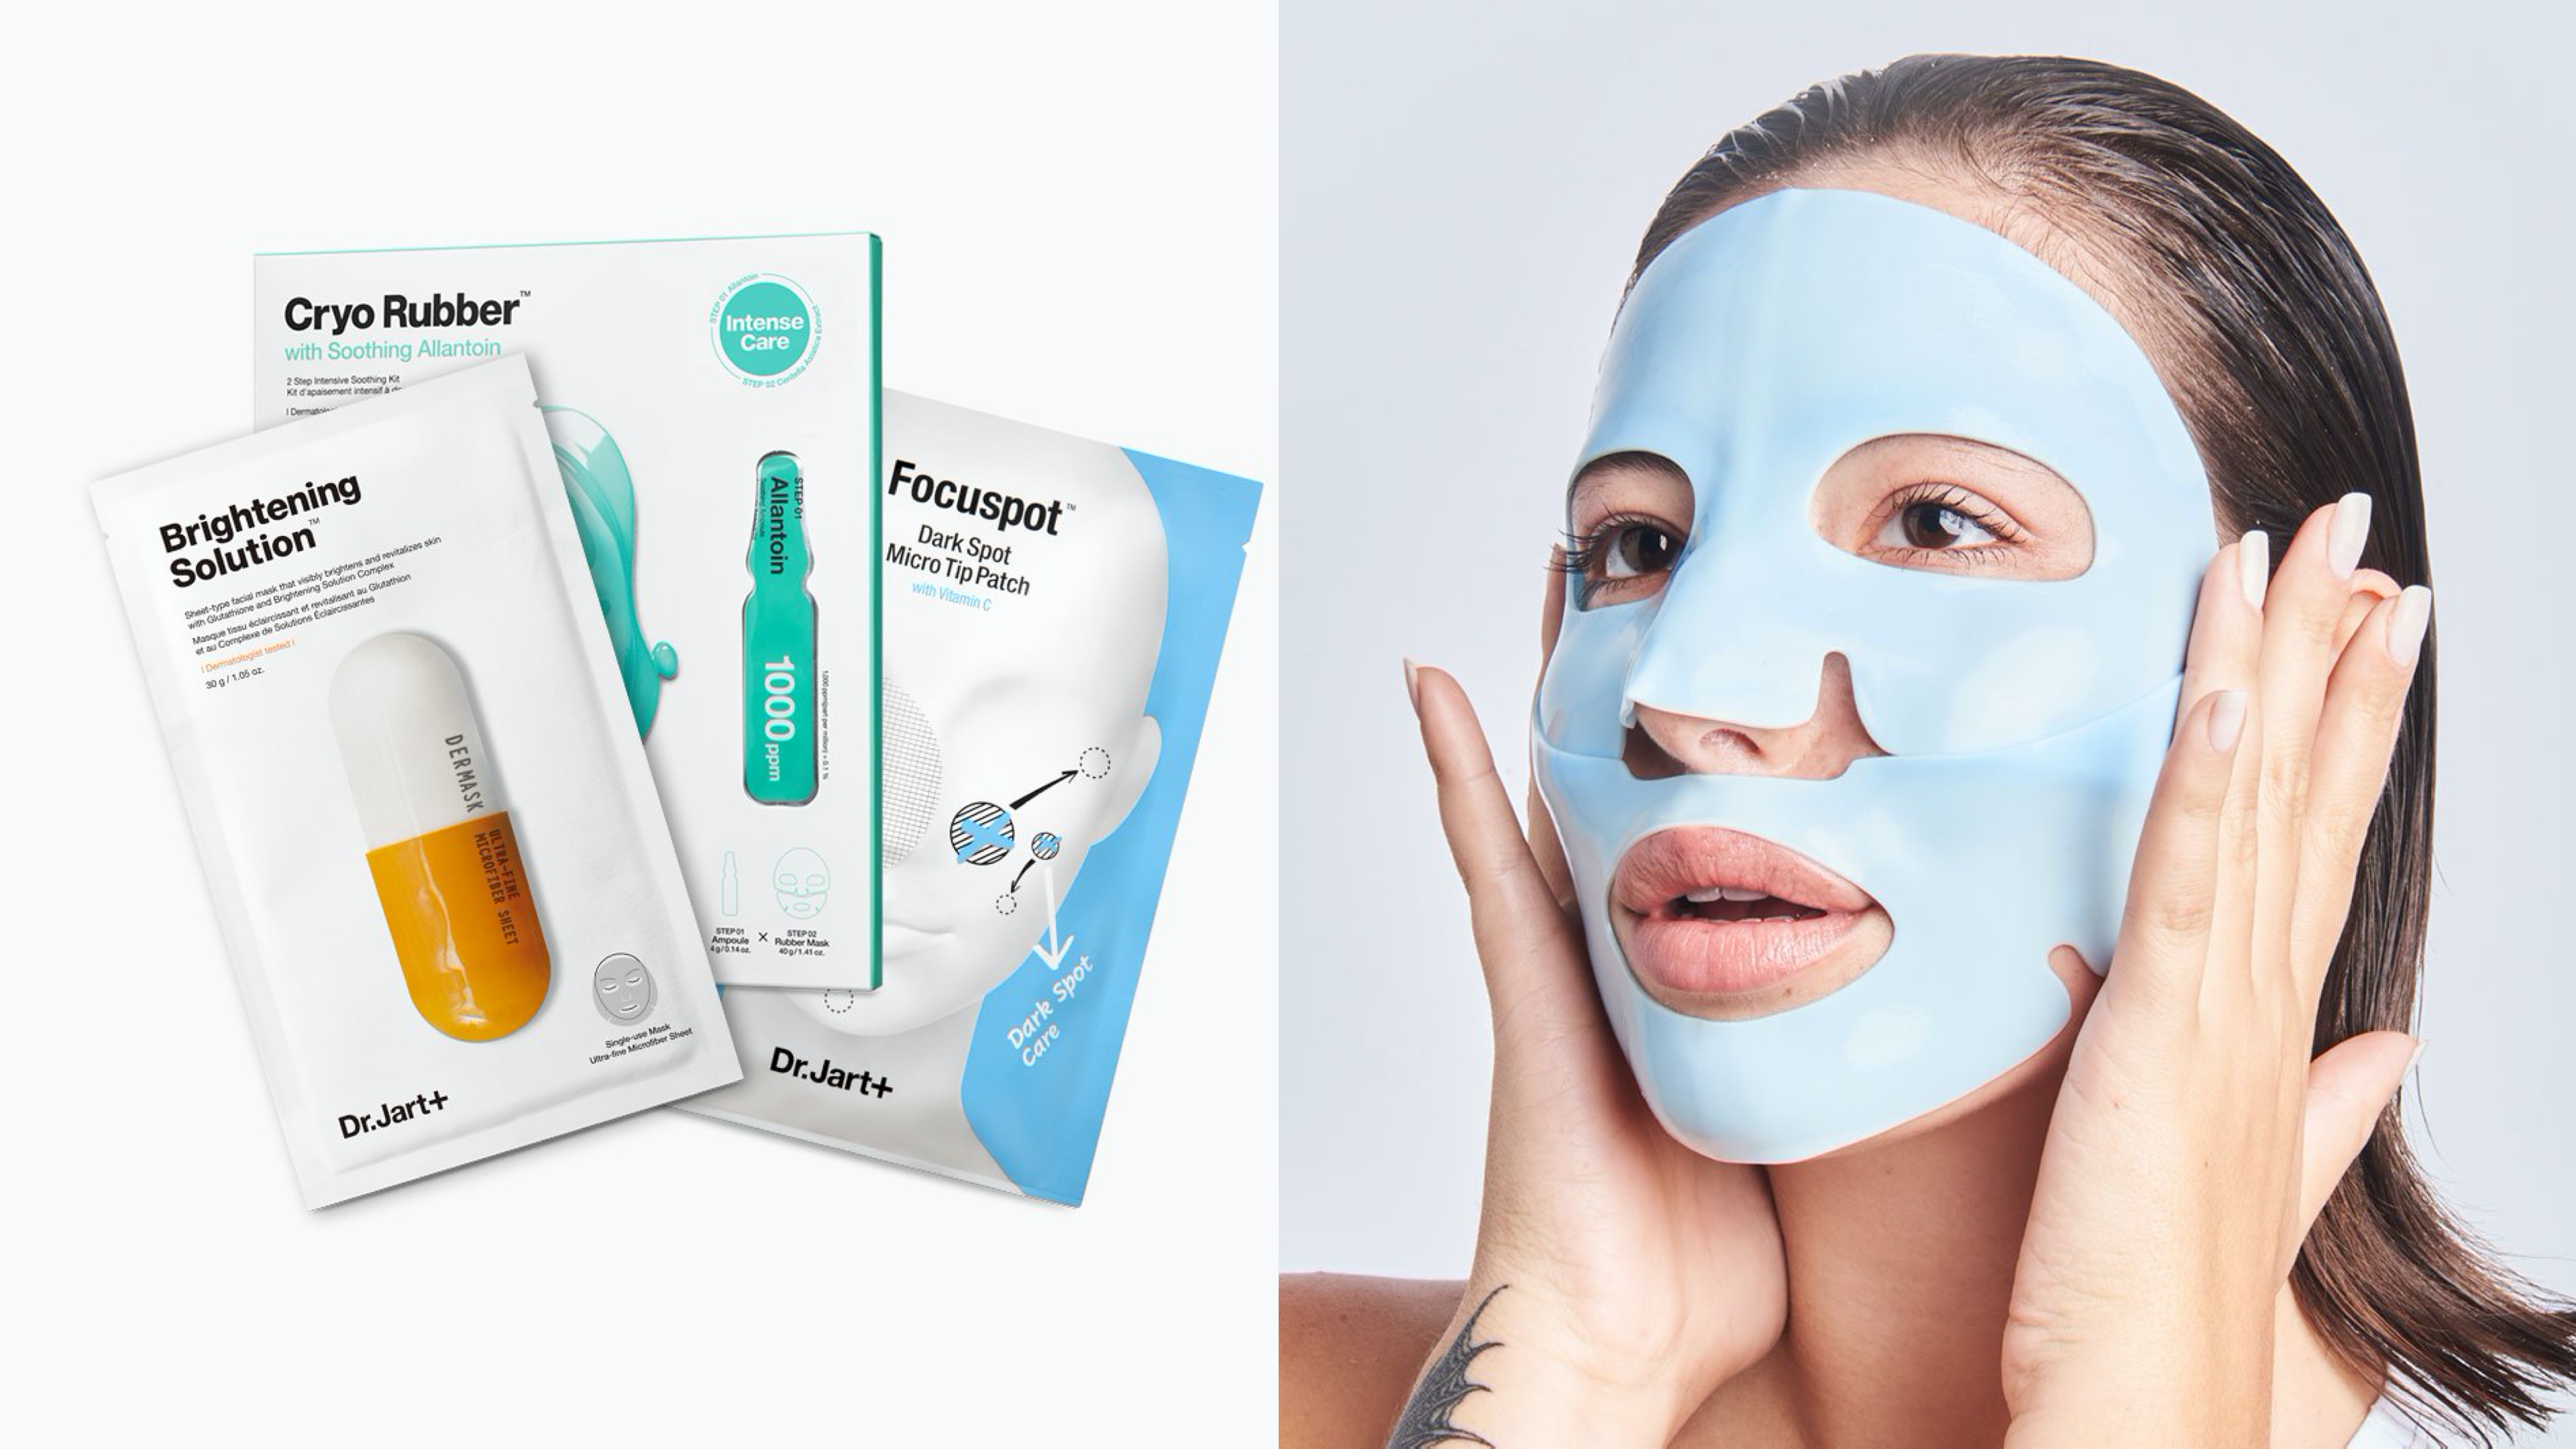 hydrating face masks for skin care and breakouts